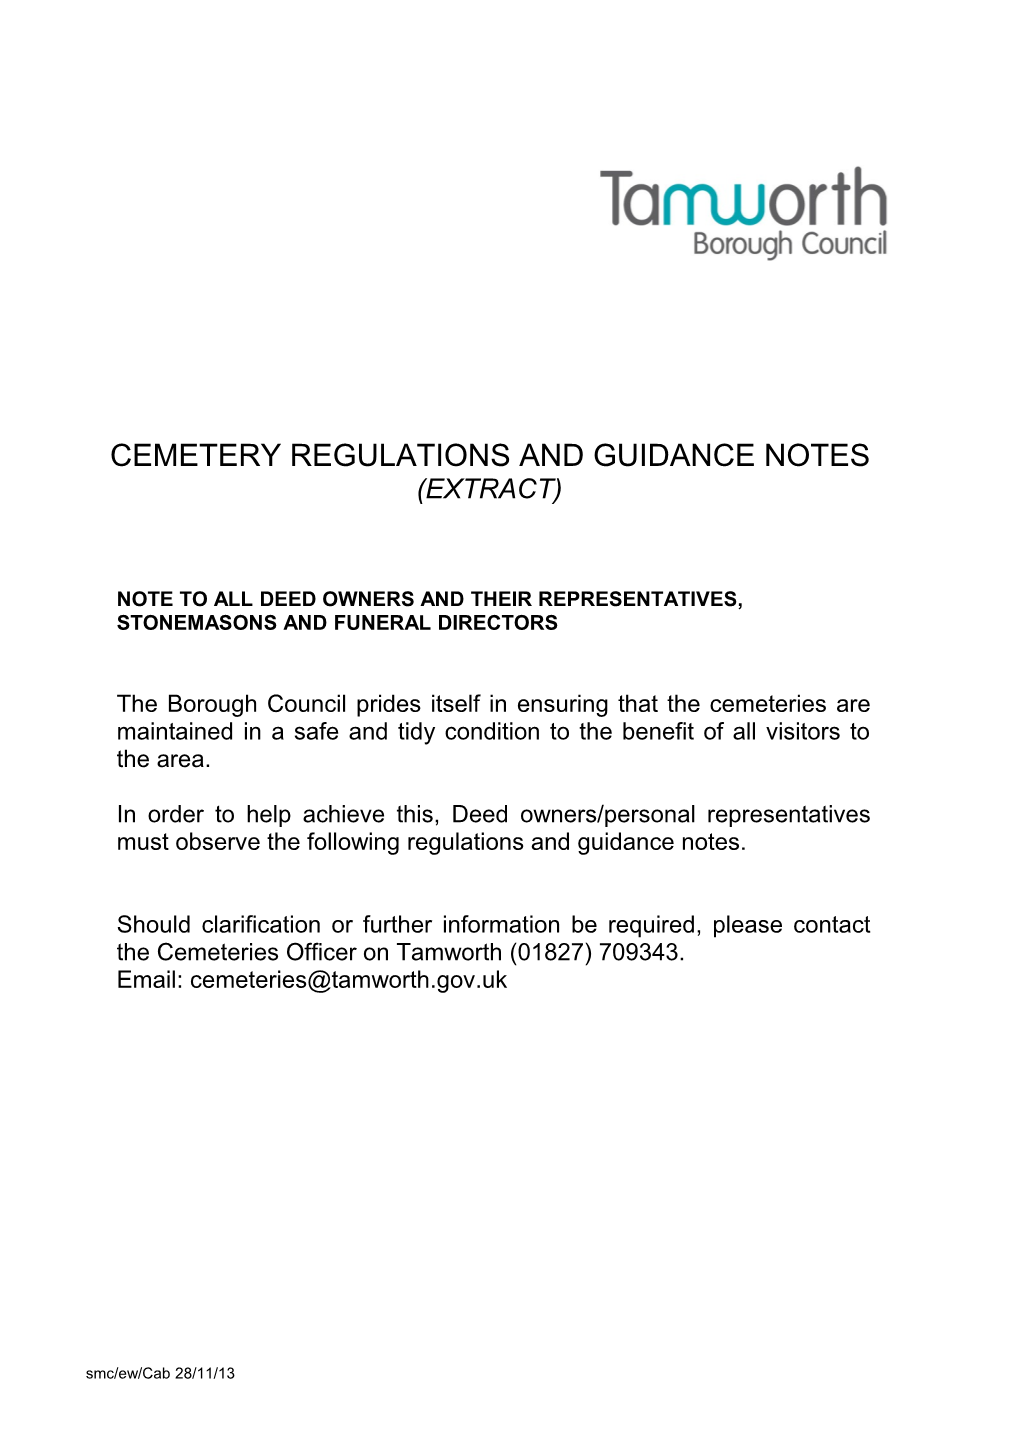 Note to All Deed Owners and Their Representatives, Stonemasons and Funeral Directors